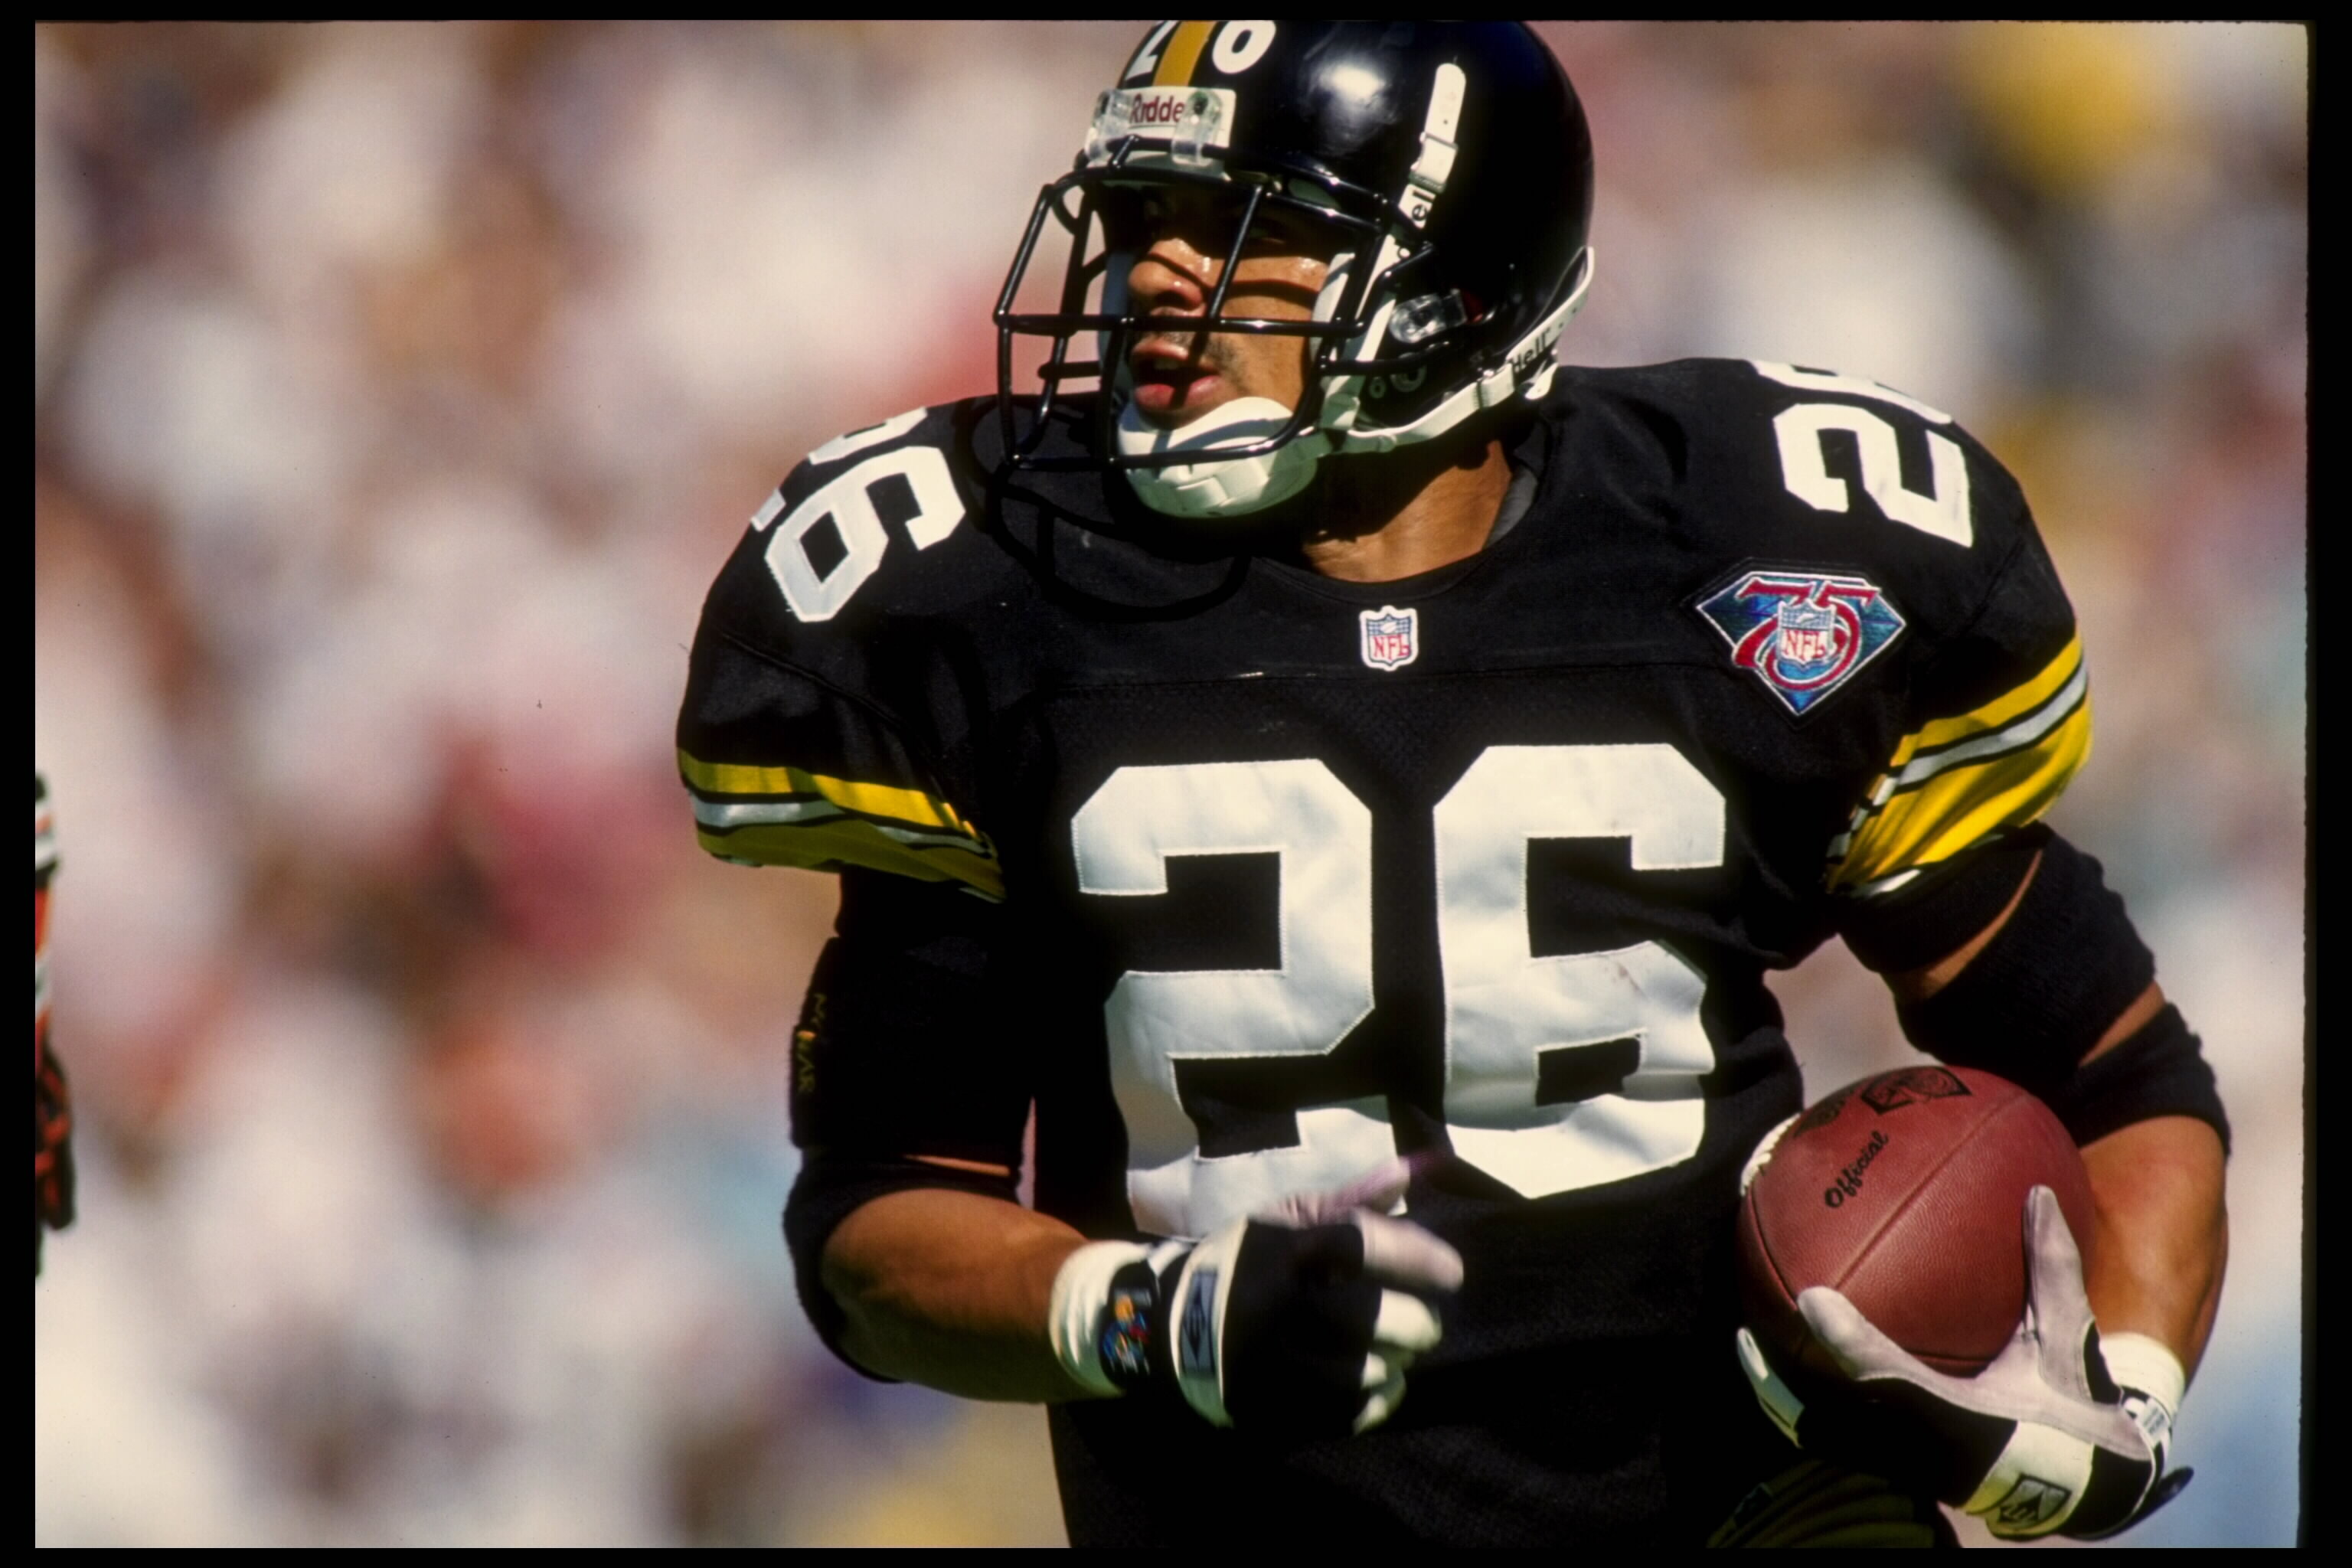 16 OCT 1994:  DEFENSIVE BACK ROD WOODSON OF THE PITTSBURGH STEELERS CARRIES THE FOOTBALL DURING THE STEELERS 14-10 WIN OVER THE CINCINNATI BENGALS AT THREE RIVERS STADIUM IN PITTSBURGH, PENNSYLVANIA.  MANDATORY CREDIT:  DOUG PENSINGER/ALLSPORT